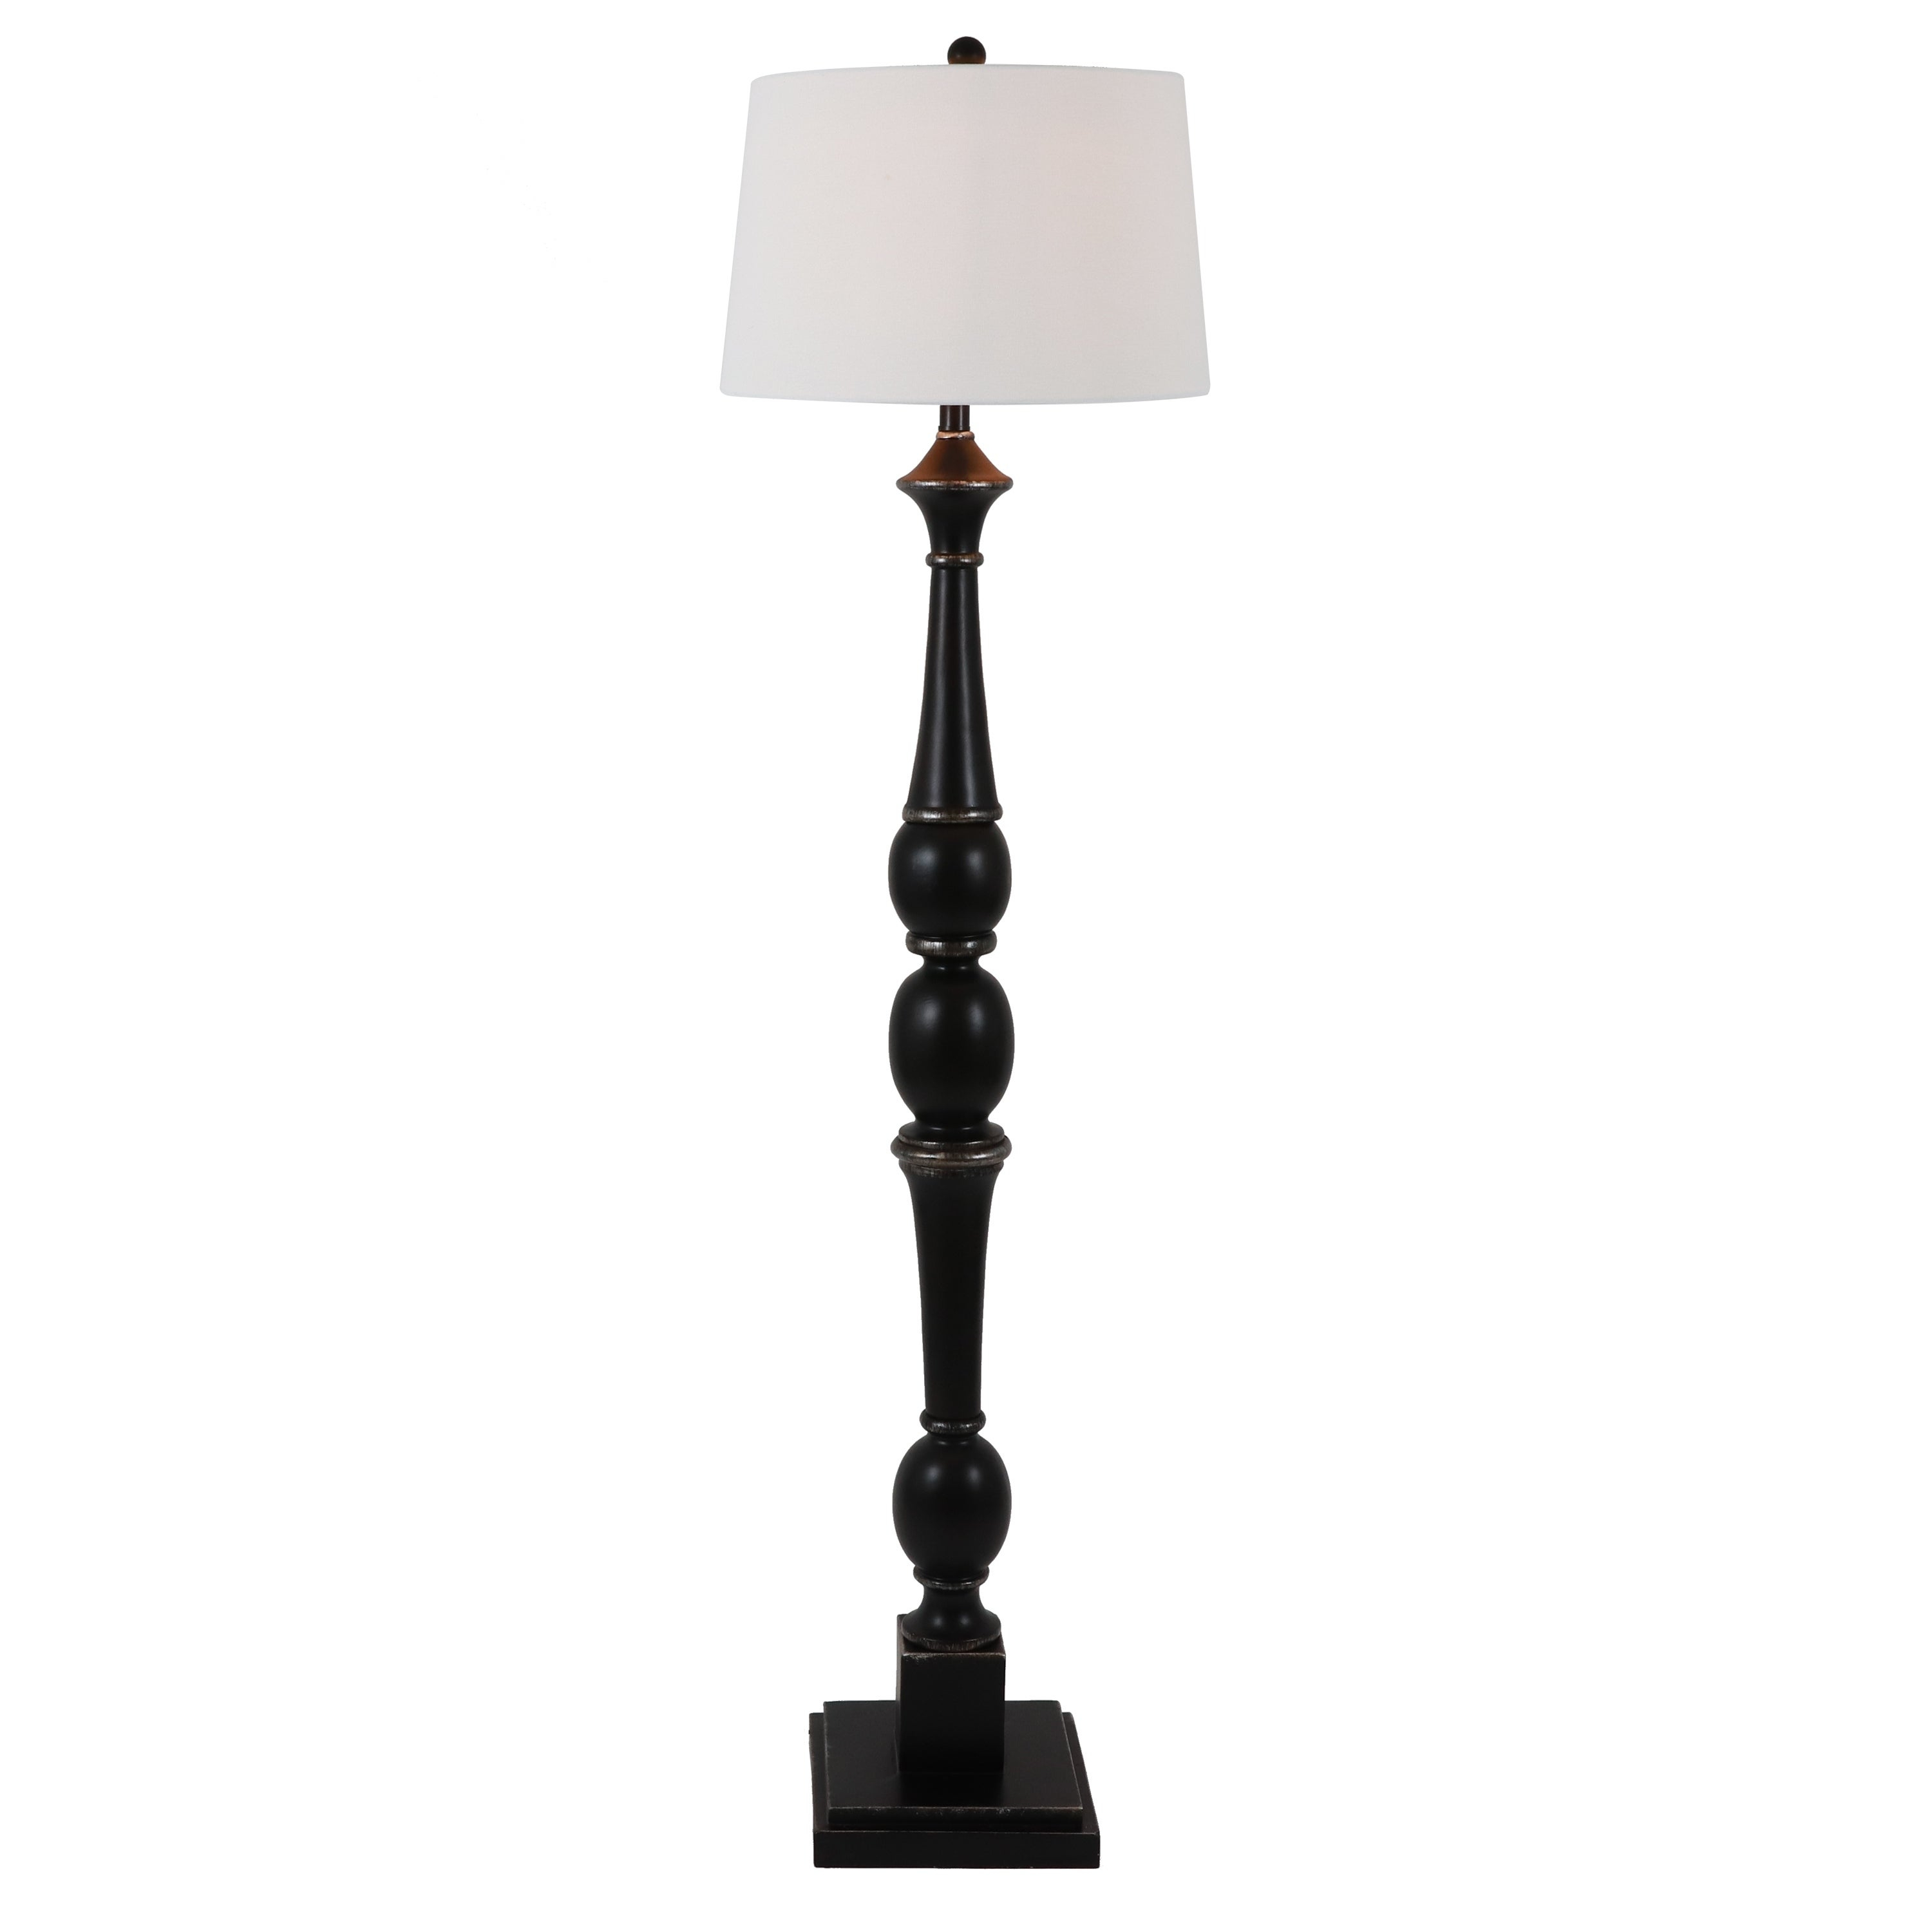 Decor Therapy Distressed Baluster Floor Lamp within size 3000 X 3000